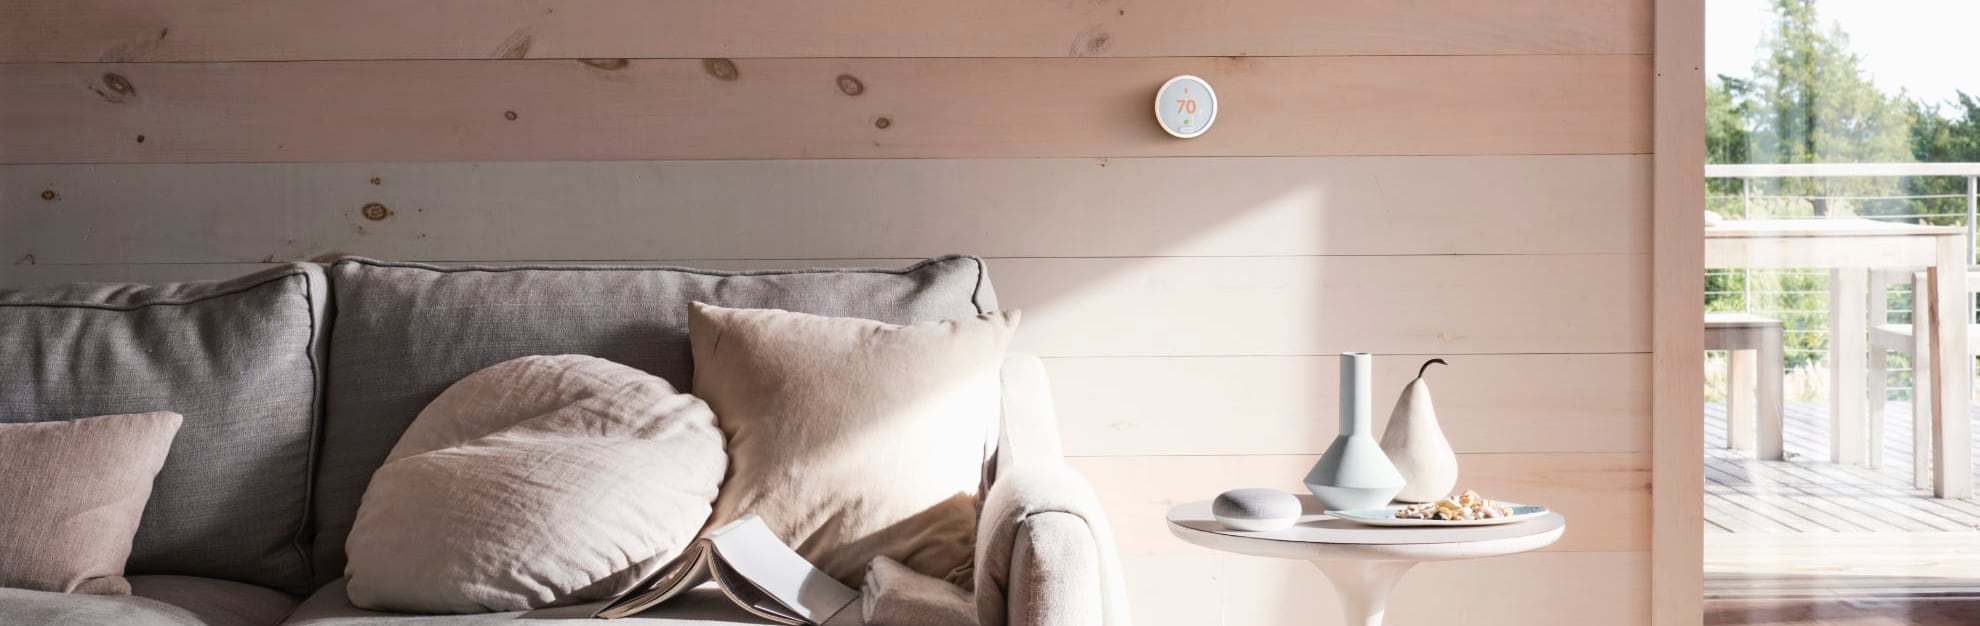 Vivint Home Automation in Mansfield